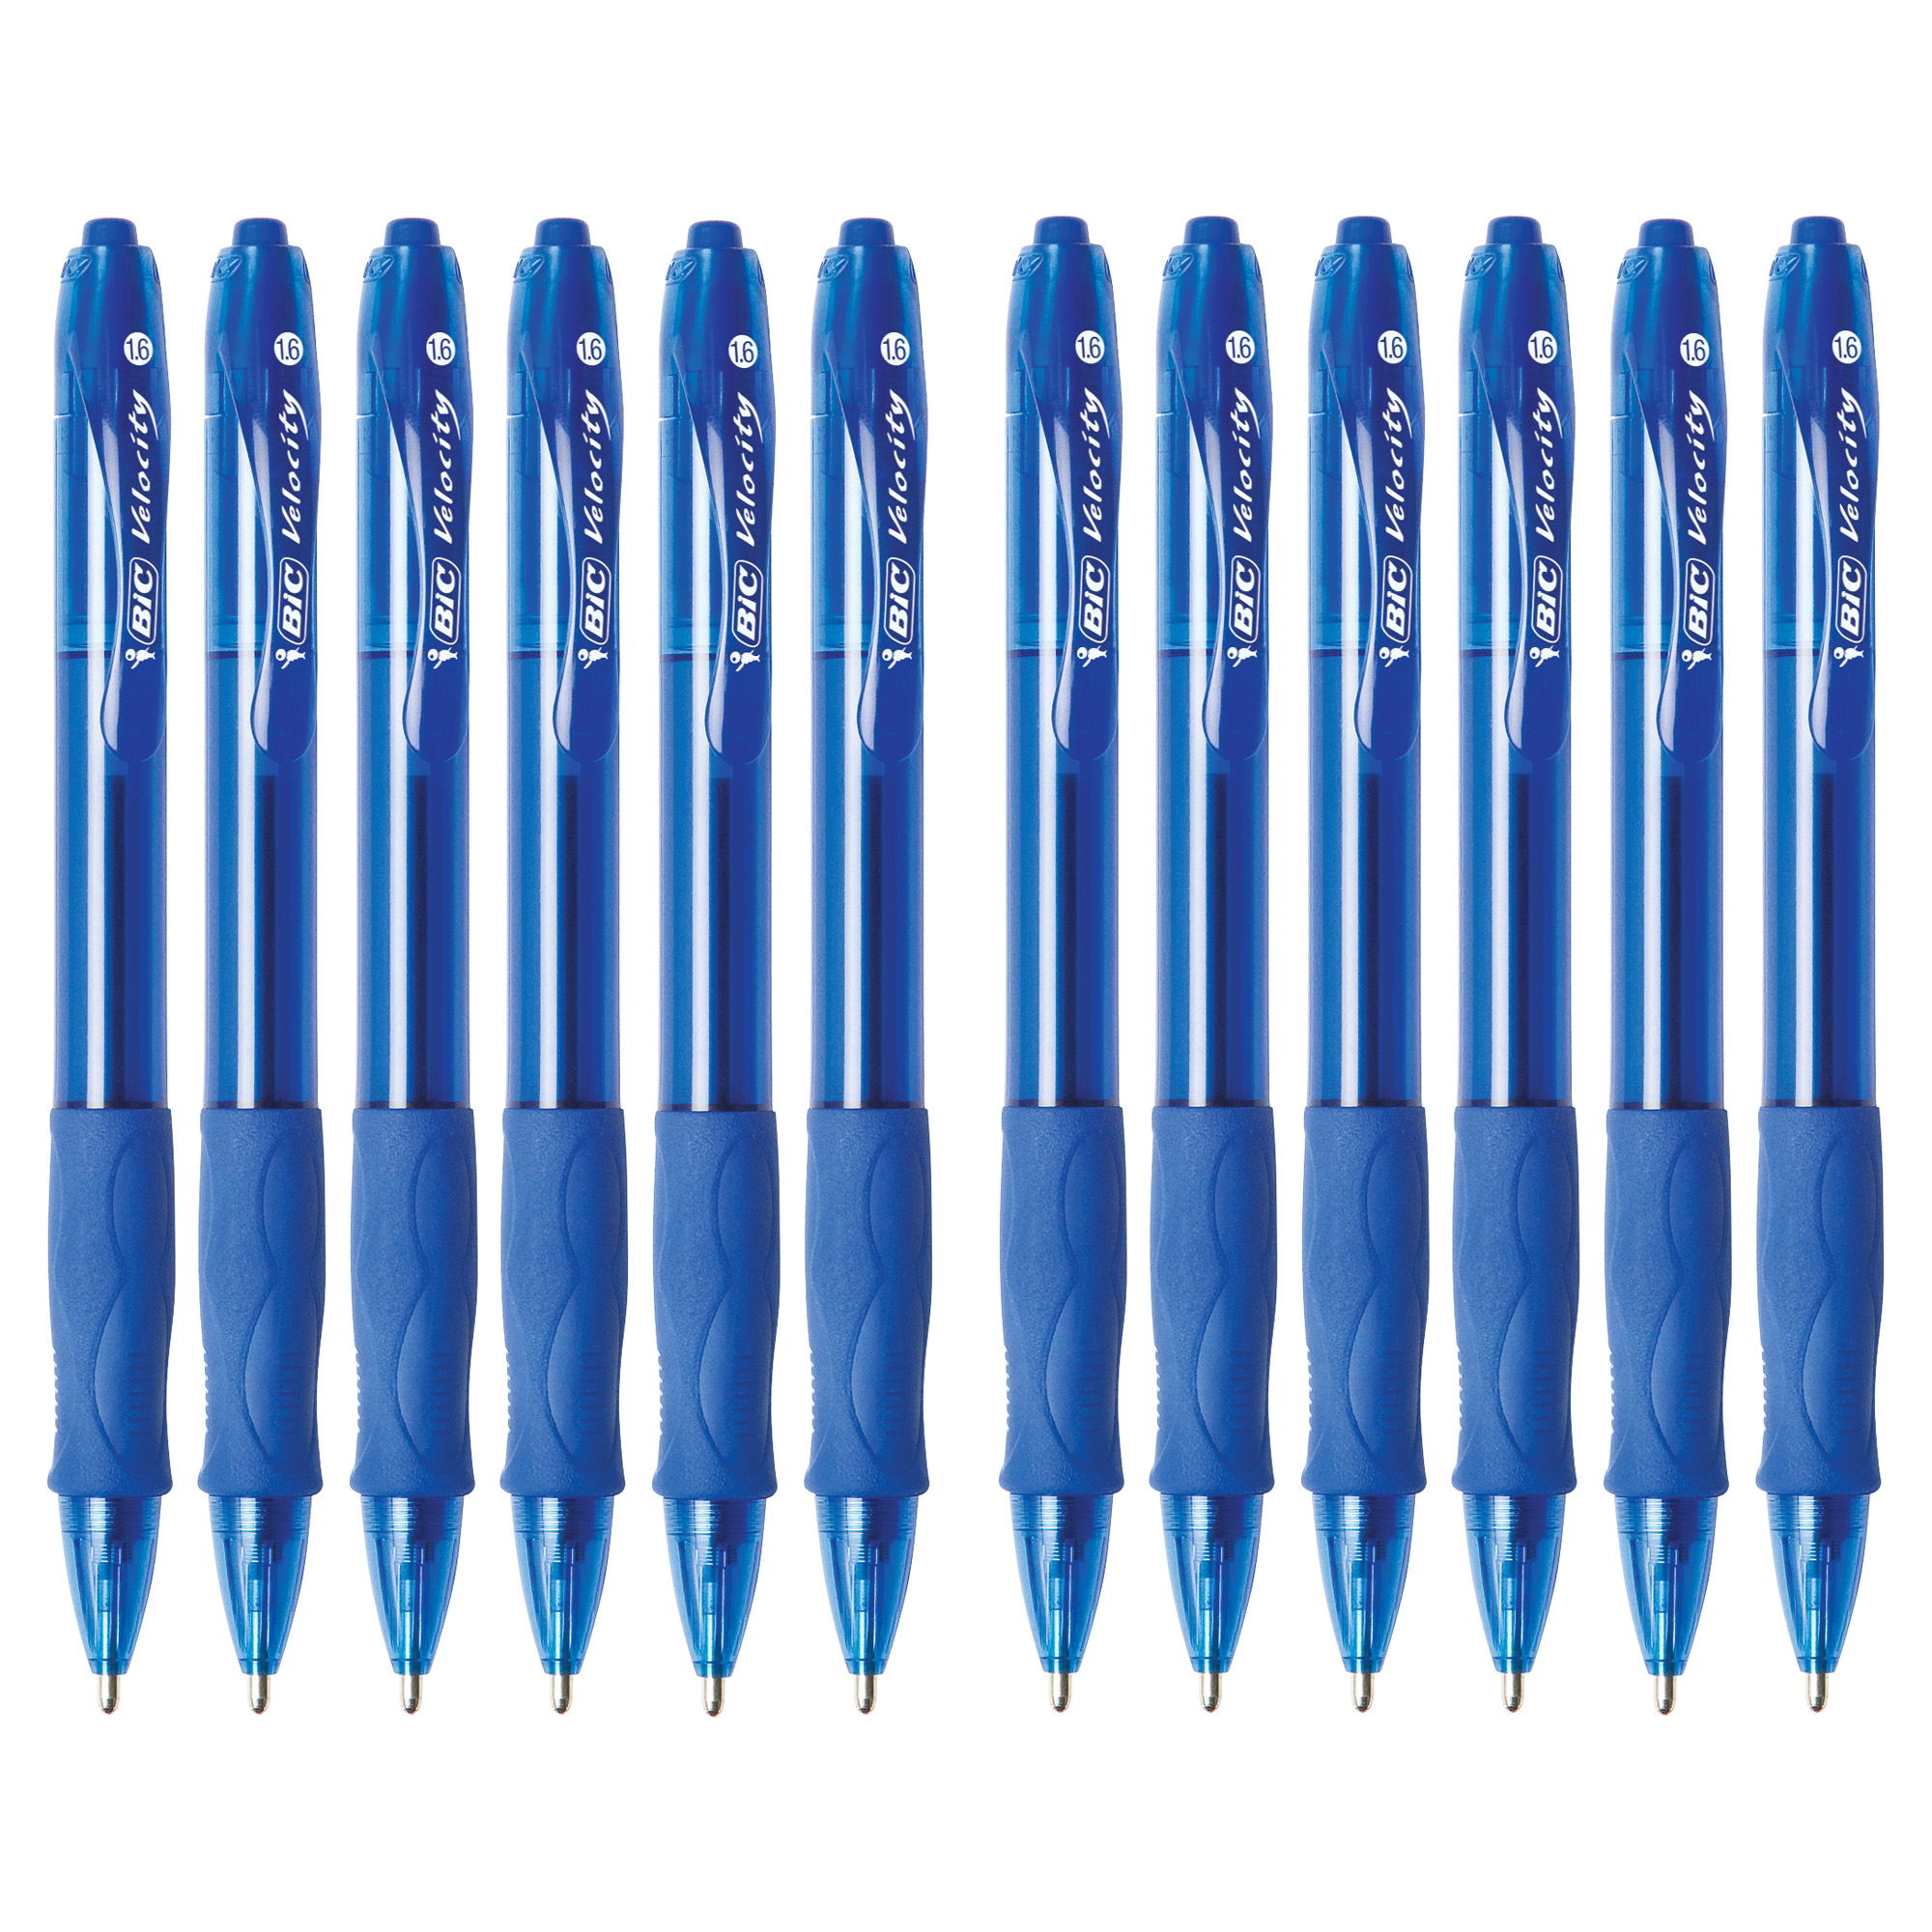 Colors Review: BIC Velocity Assorted Colors, Ballpoint, 1.6mm